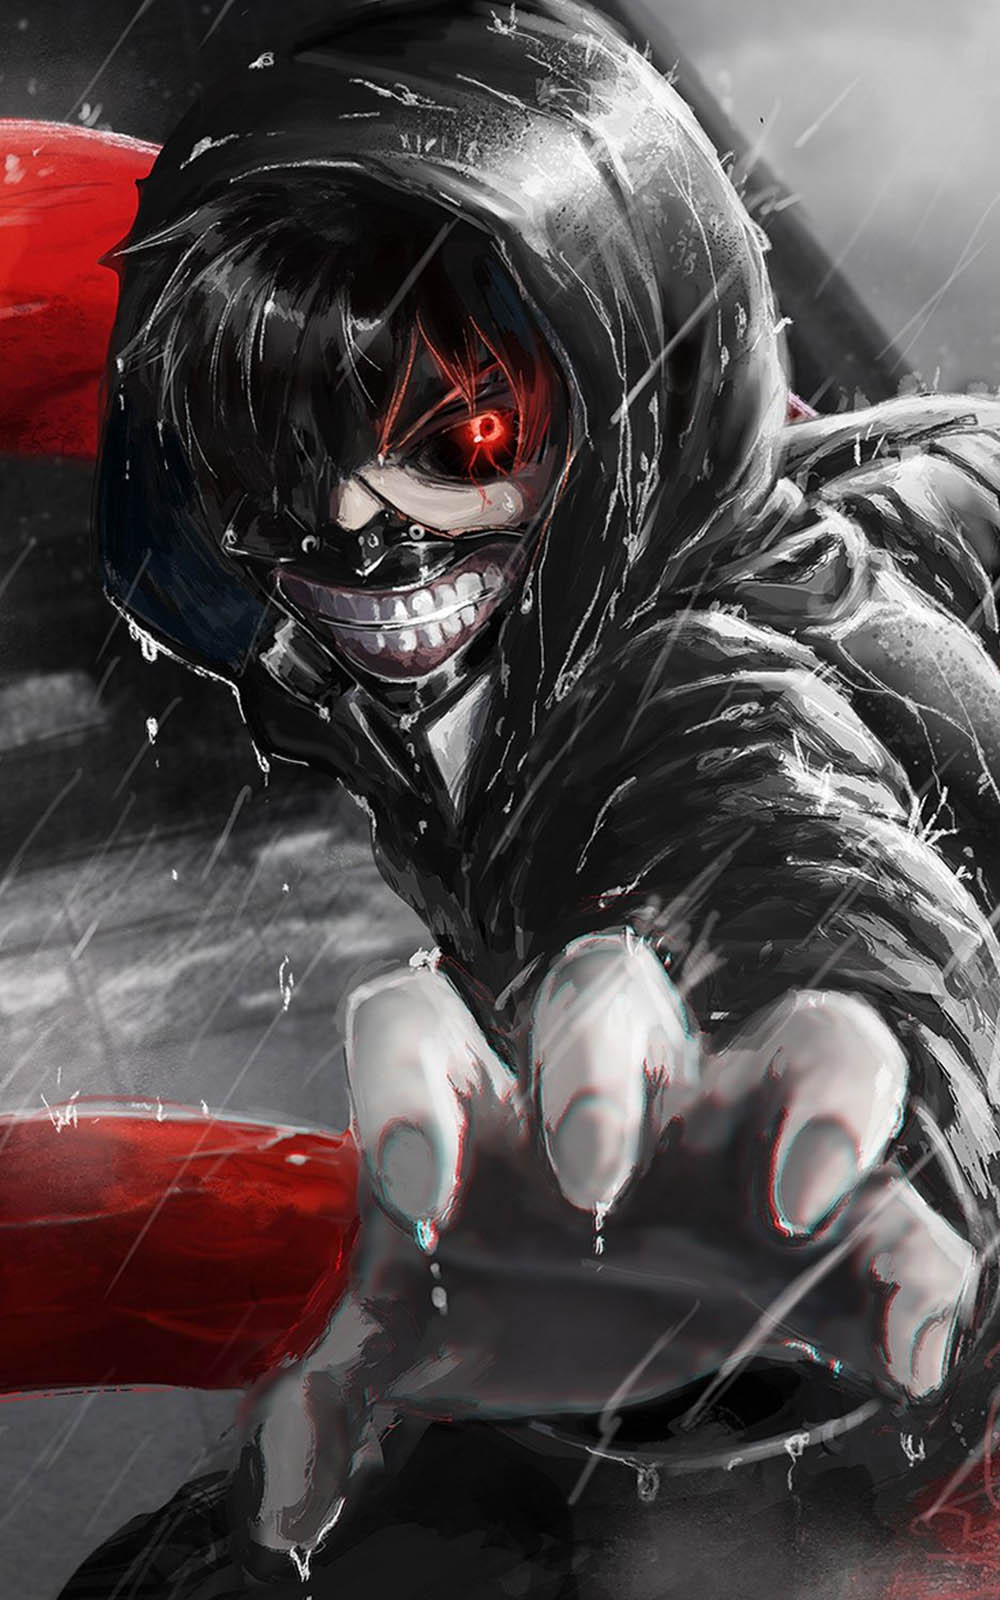 Angry Tokyo Ghoul 4K Ultra HD Mobile Wallpaper